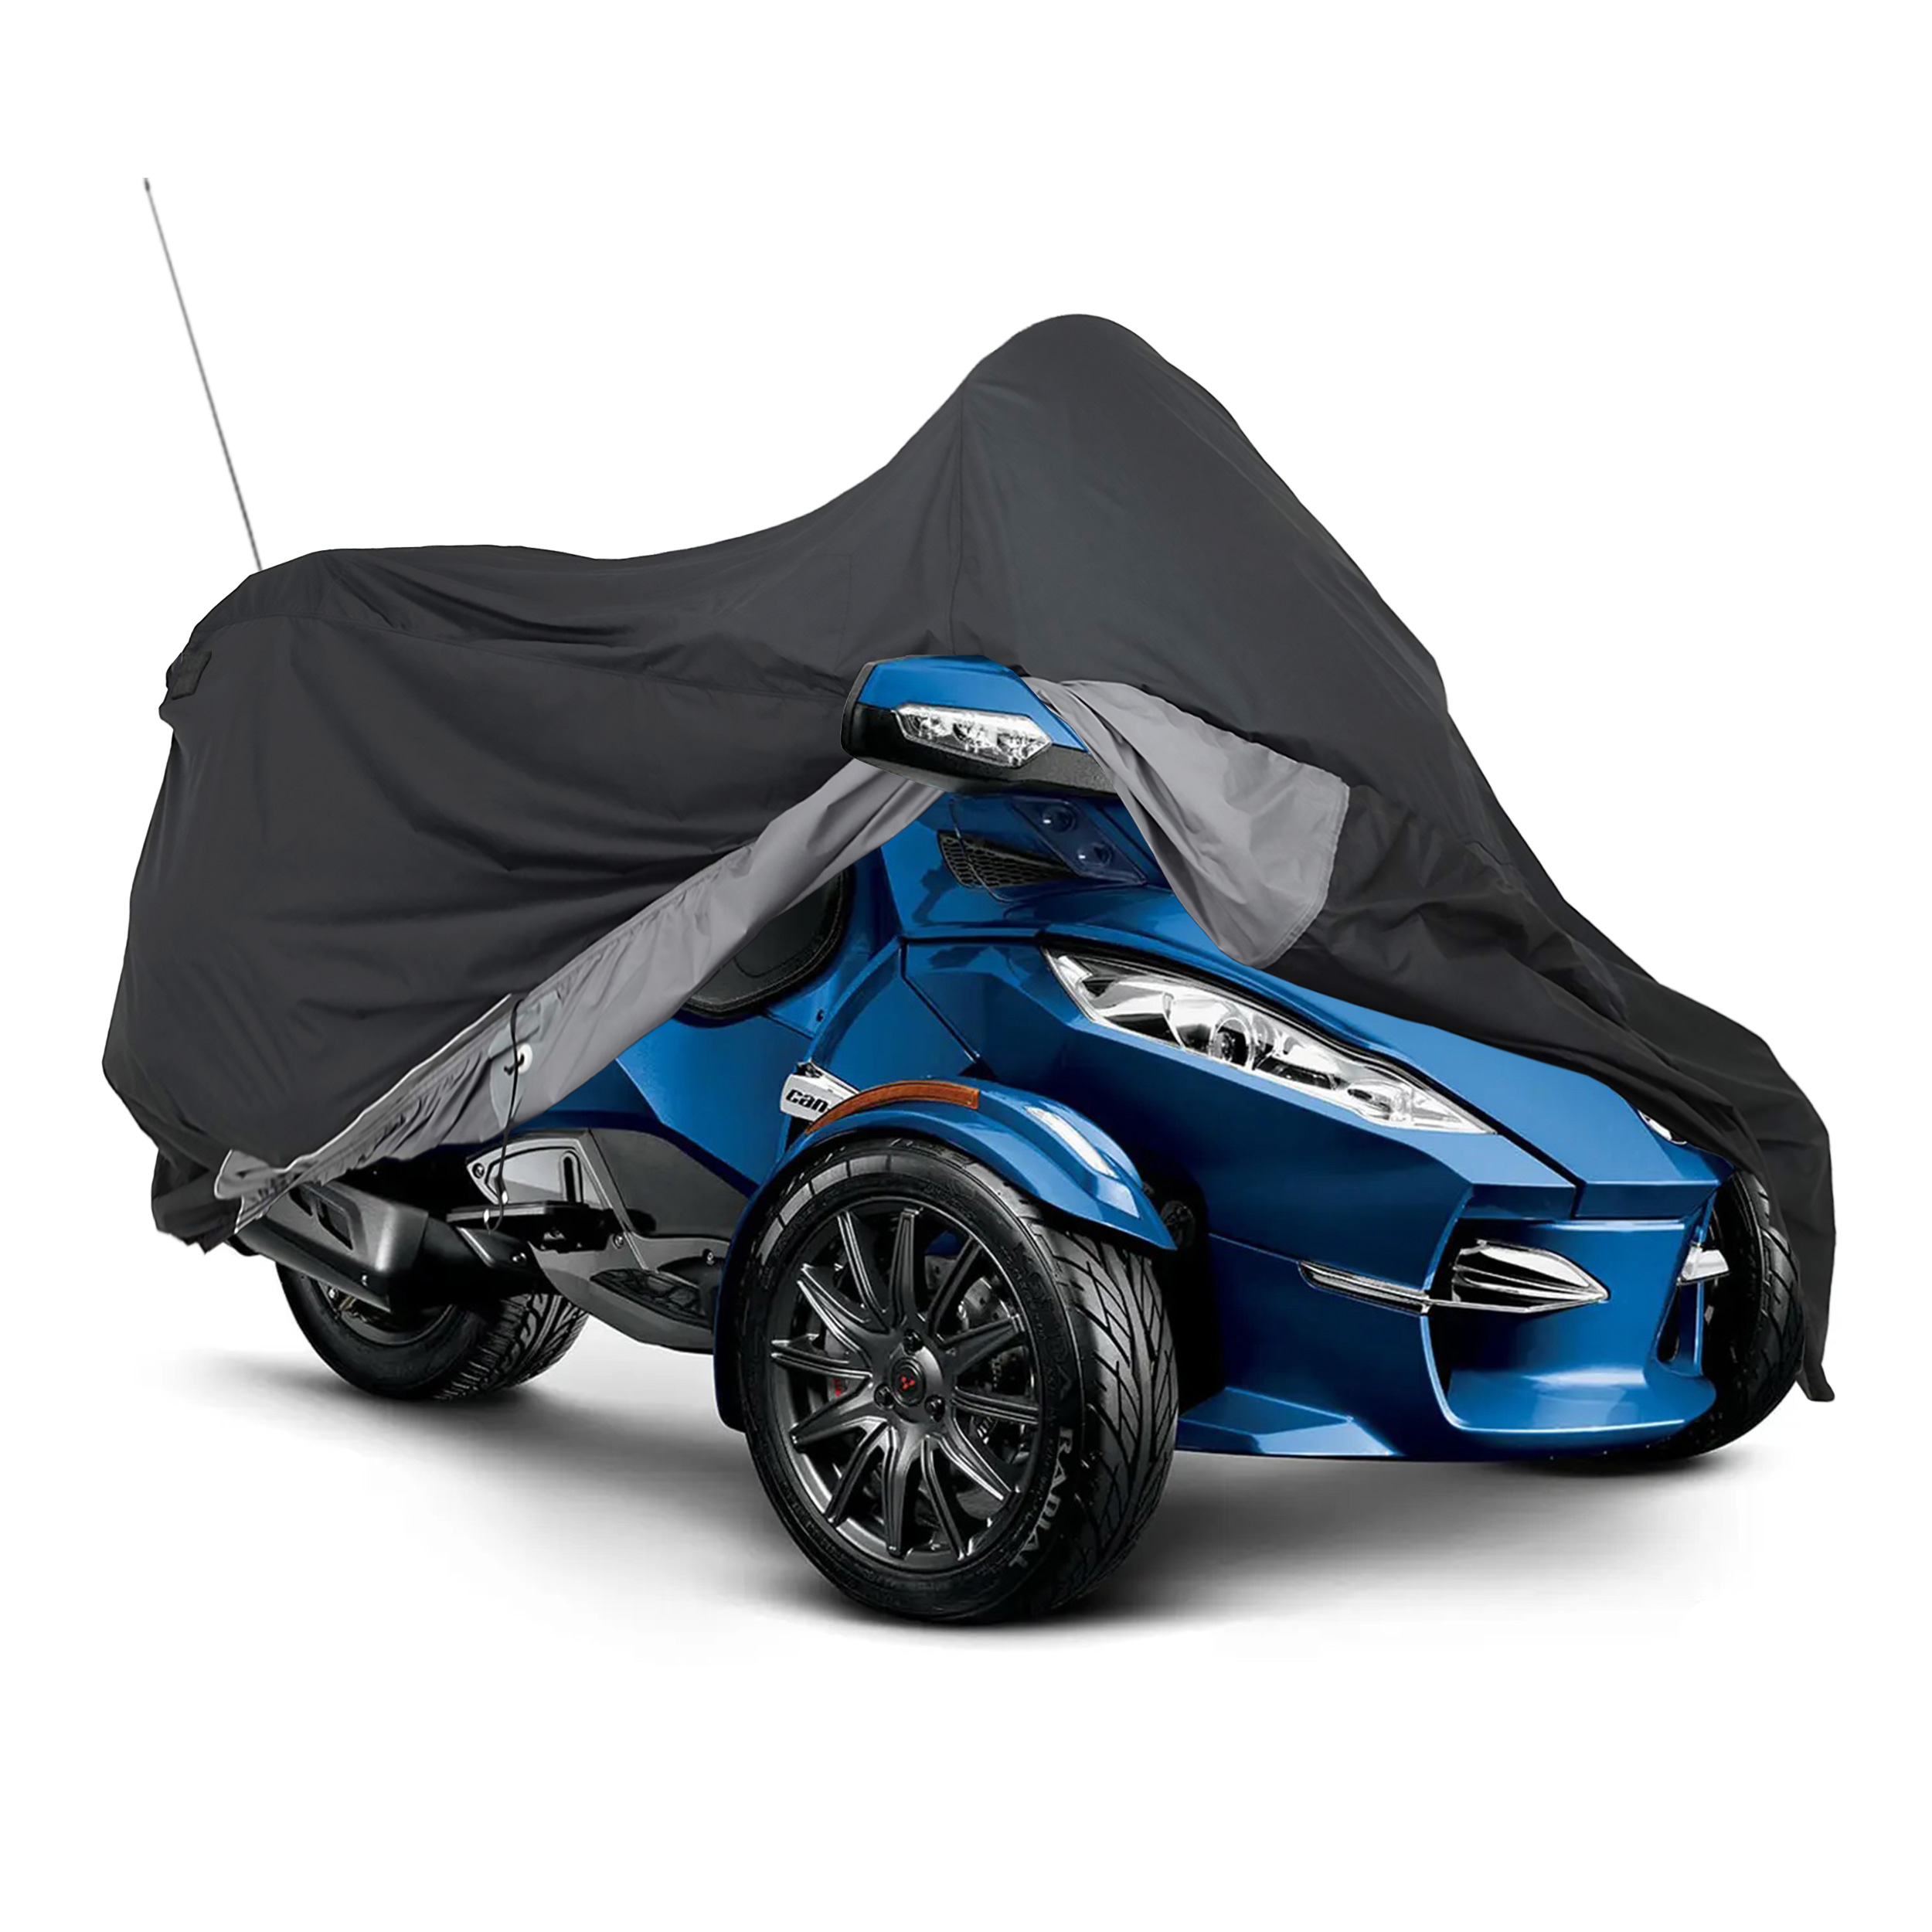 North East Harbor Full Storage Cover Compatible with 2010-2022 Can-Am Spyder RT-S | Waterproof, Weather Resistant Fabric, Black